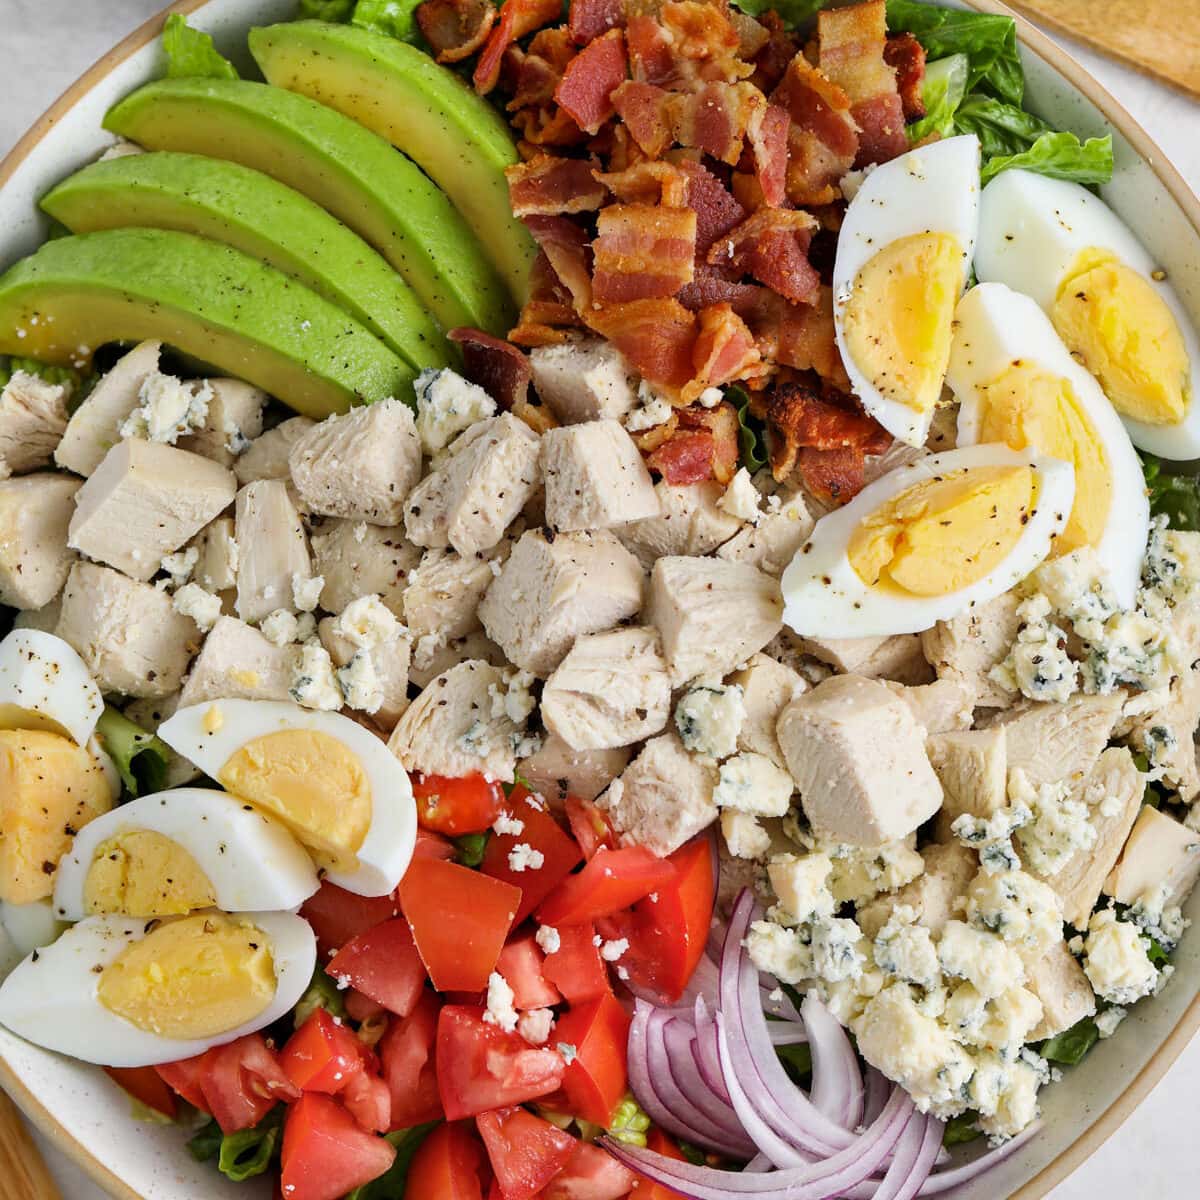 Cobb Salad Recipe (With Low Carb Ingredients!) - Easy Low Carb